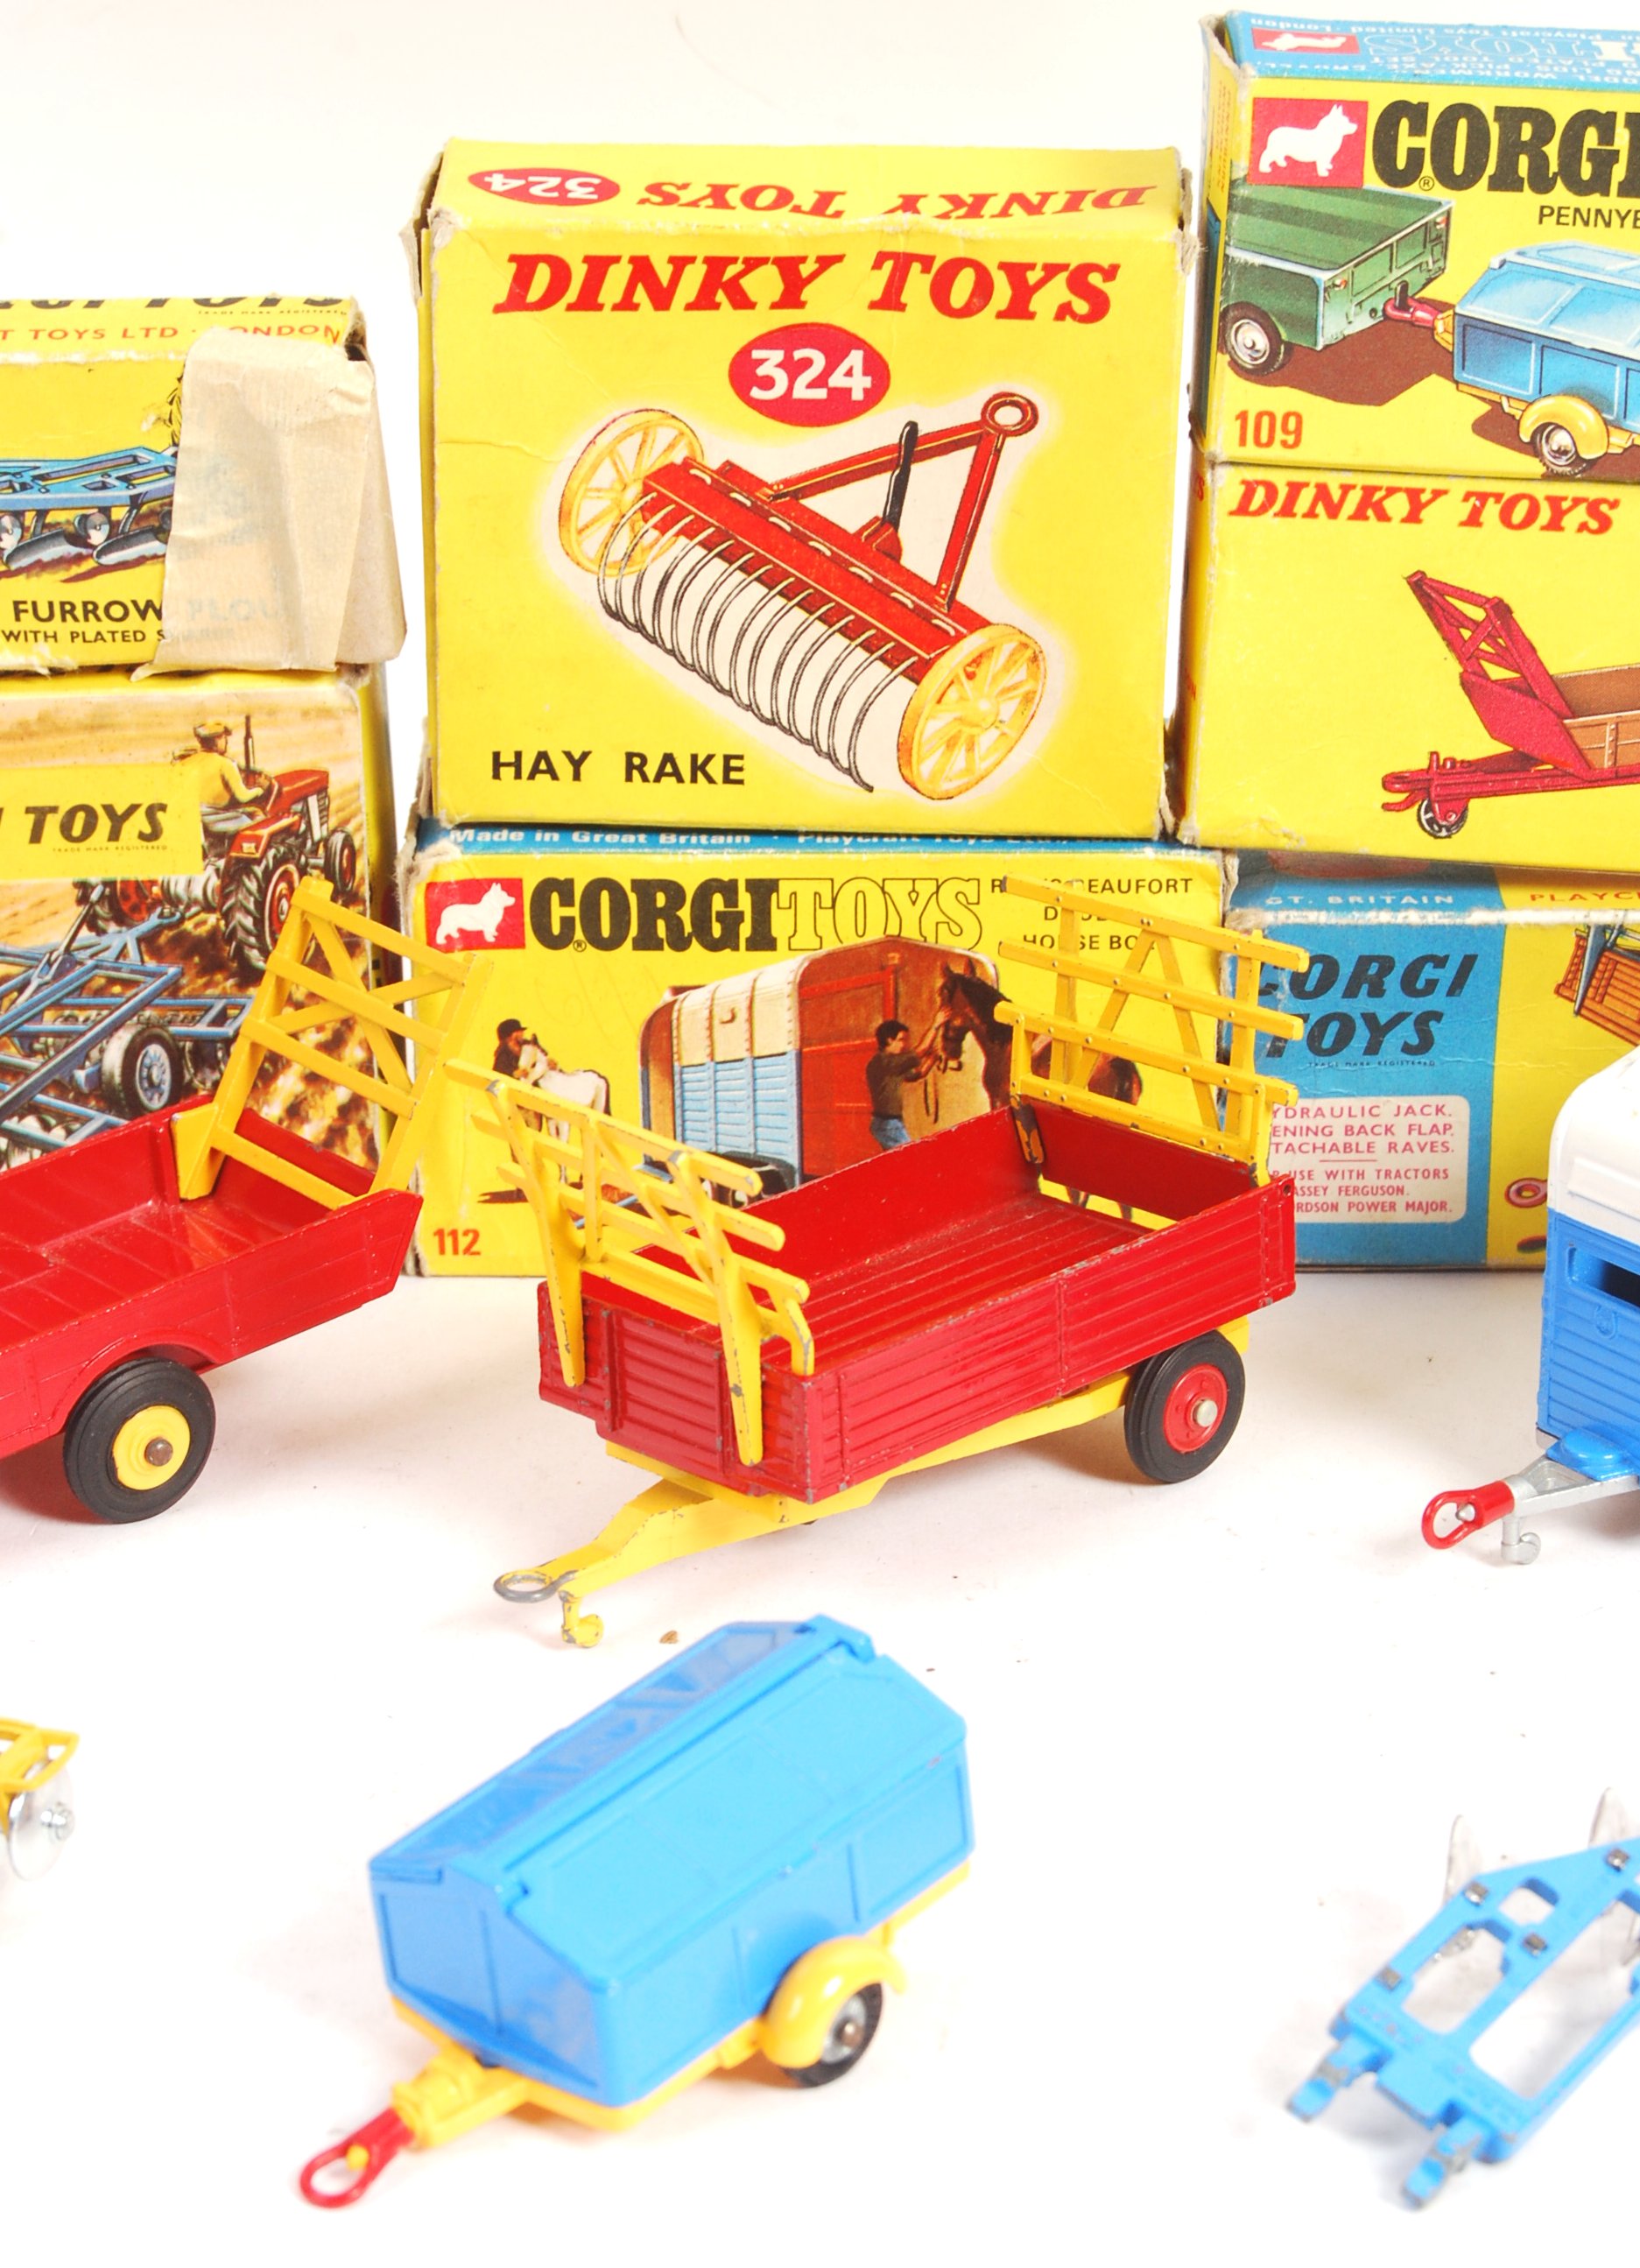 COLLECTION OF VINTAGE DINKY TOYS & CORGI TOYS DIECAST FARM MODELS - Image 3 of 5